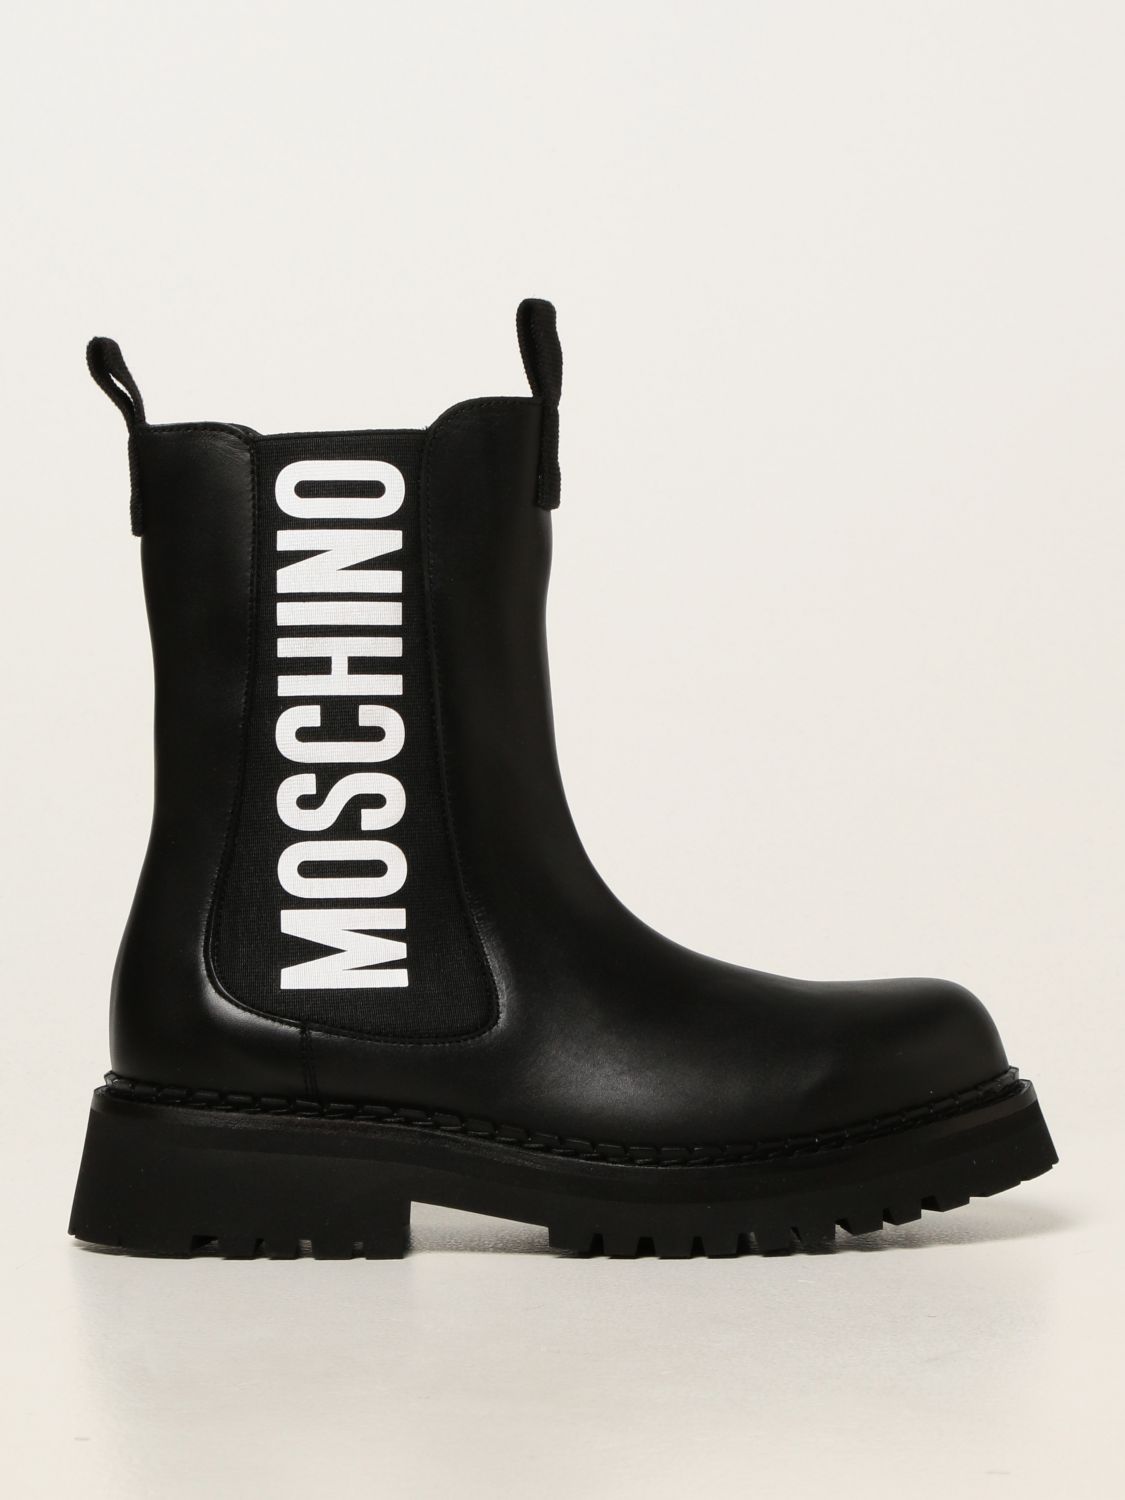 Bottines plates Moschino Couture: Bottines en cuir Moschino Couture noir 1